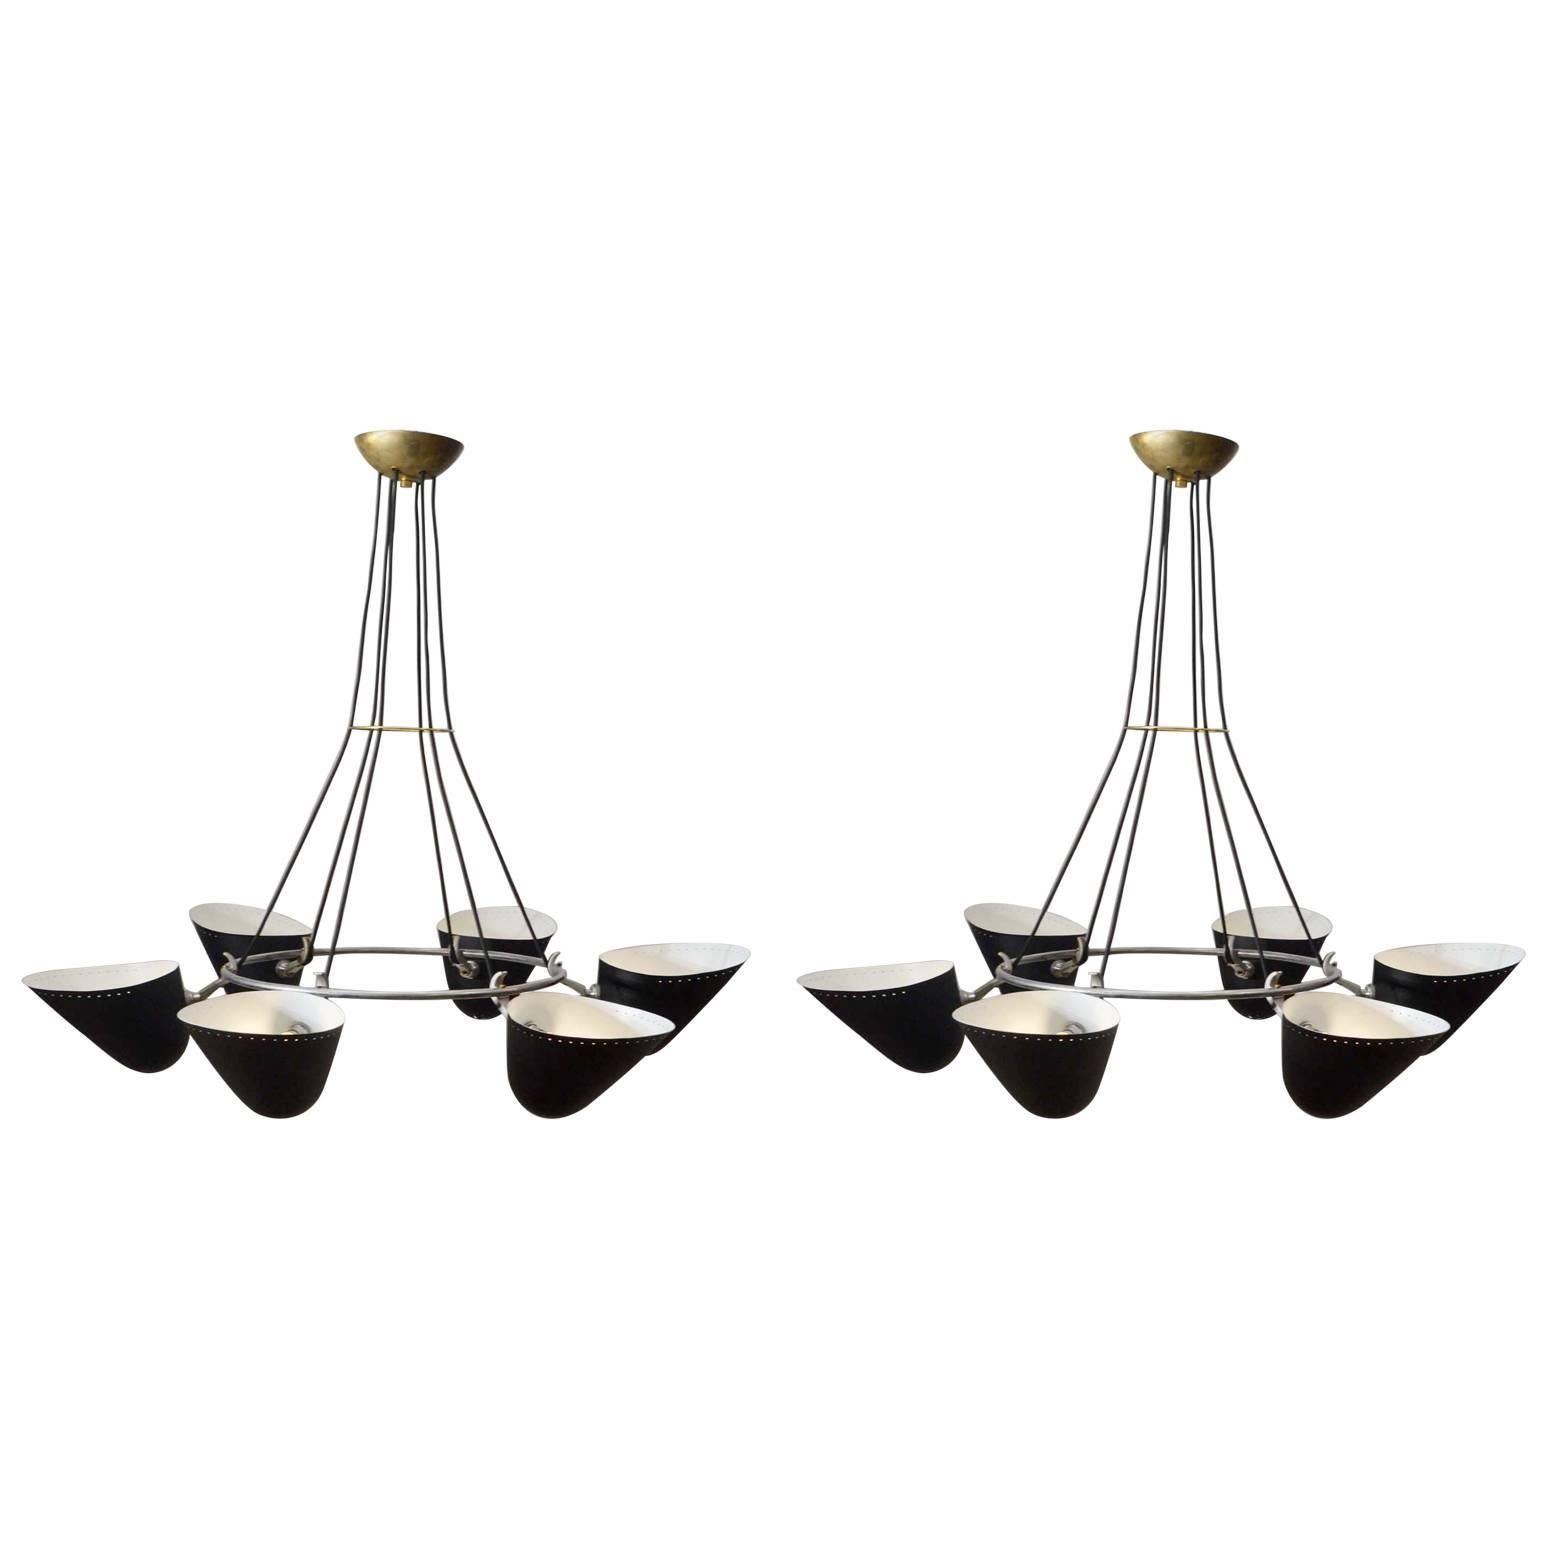 Large Pair of 1950s Black Metal Chandeliers by A.B. Read for Troughton & Young